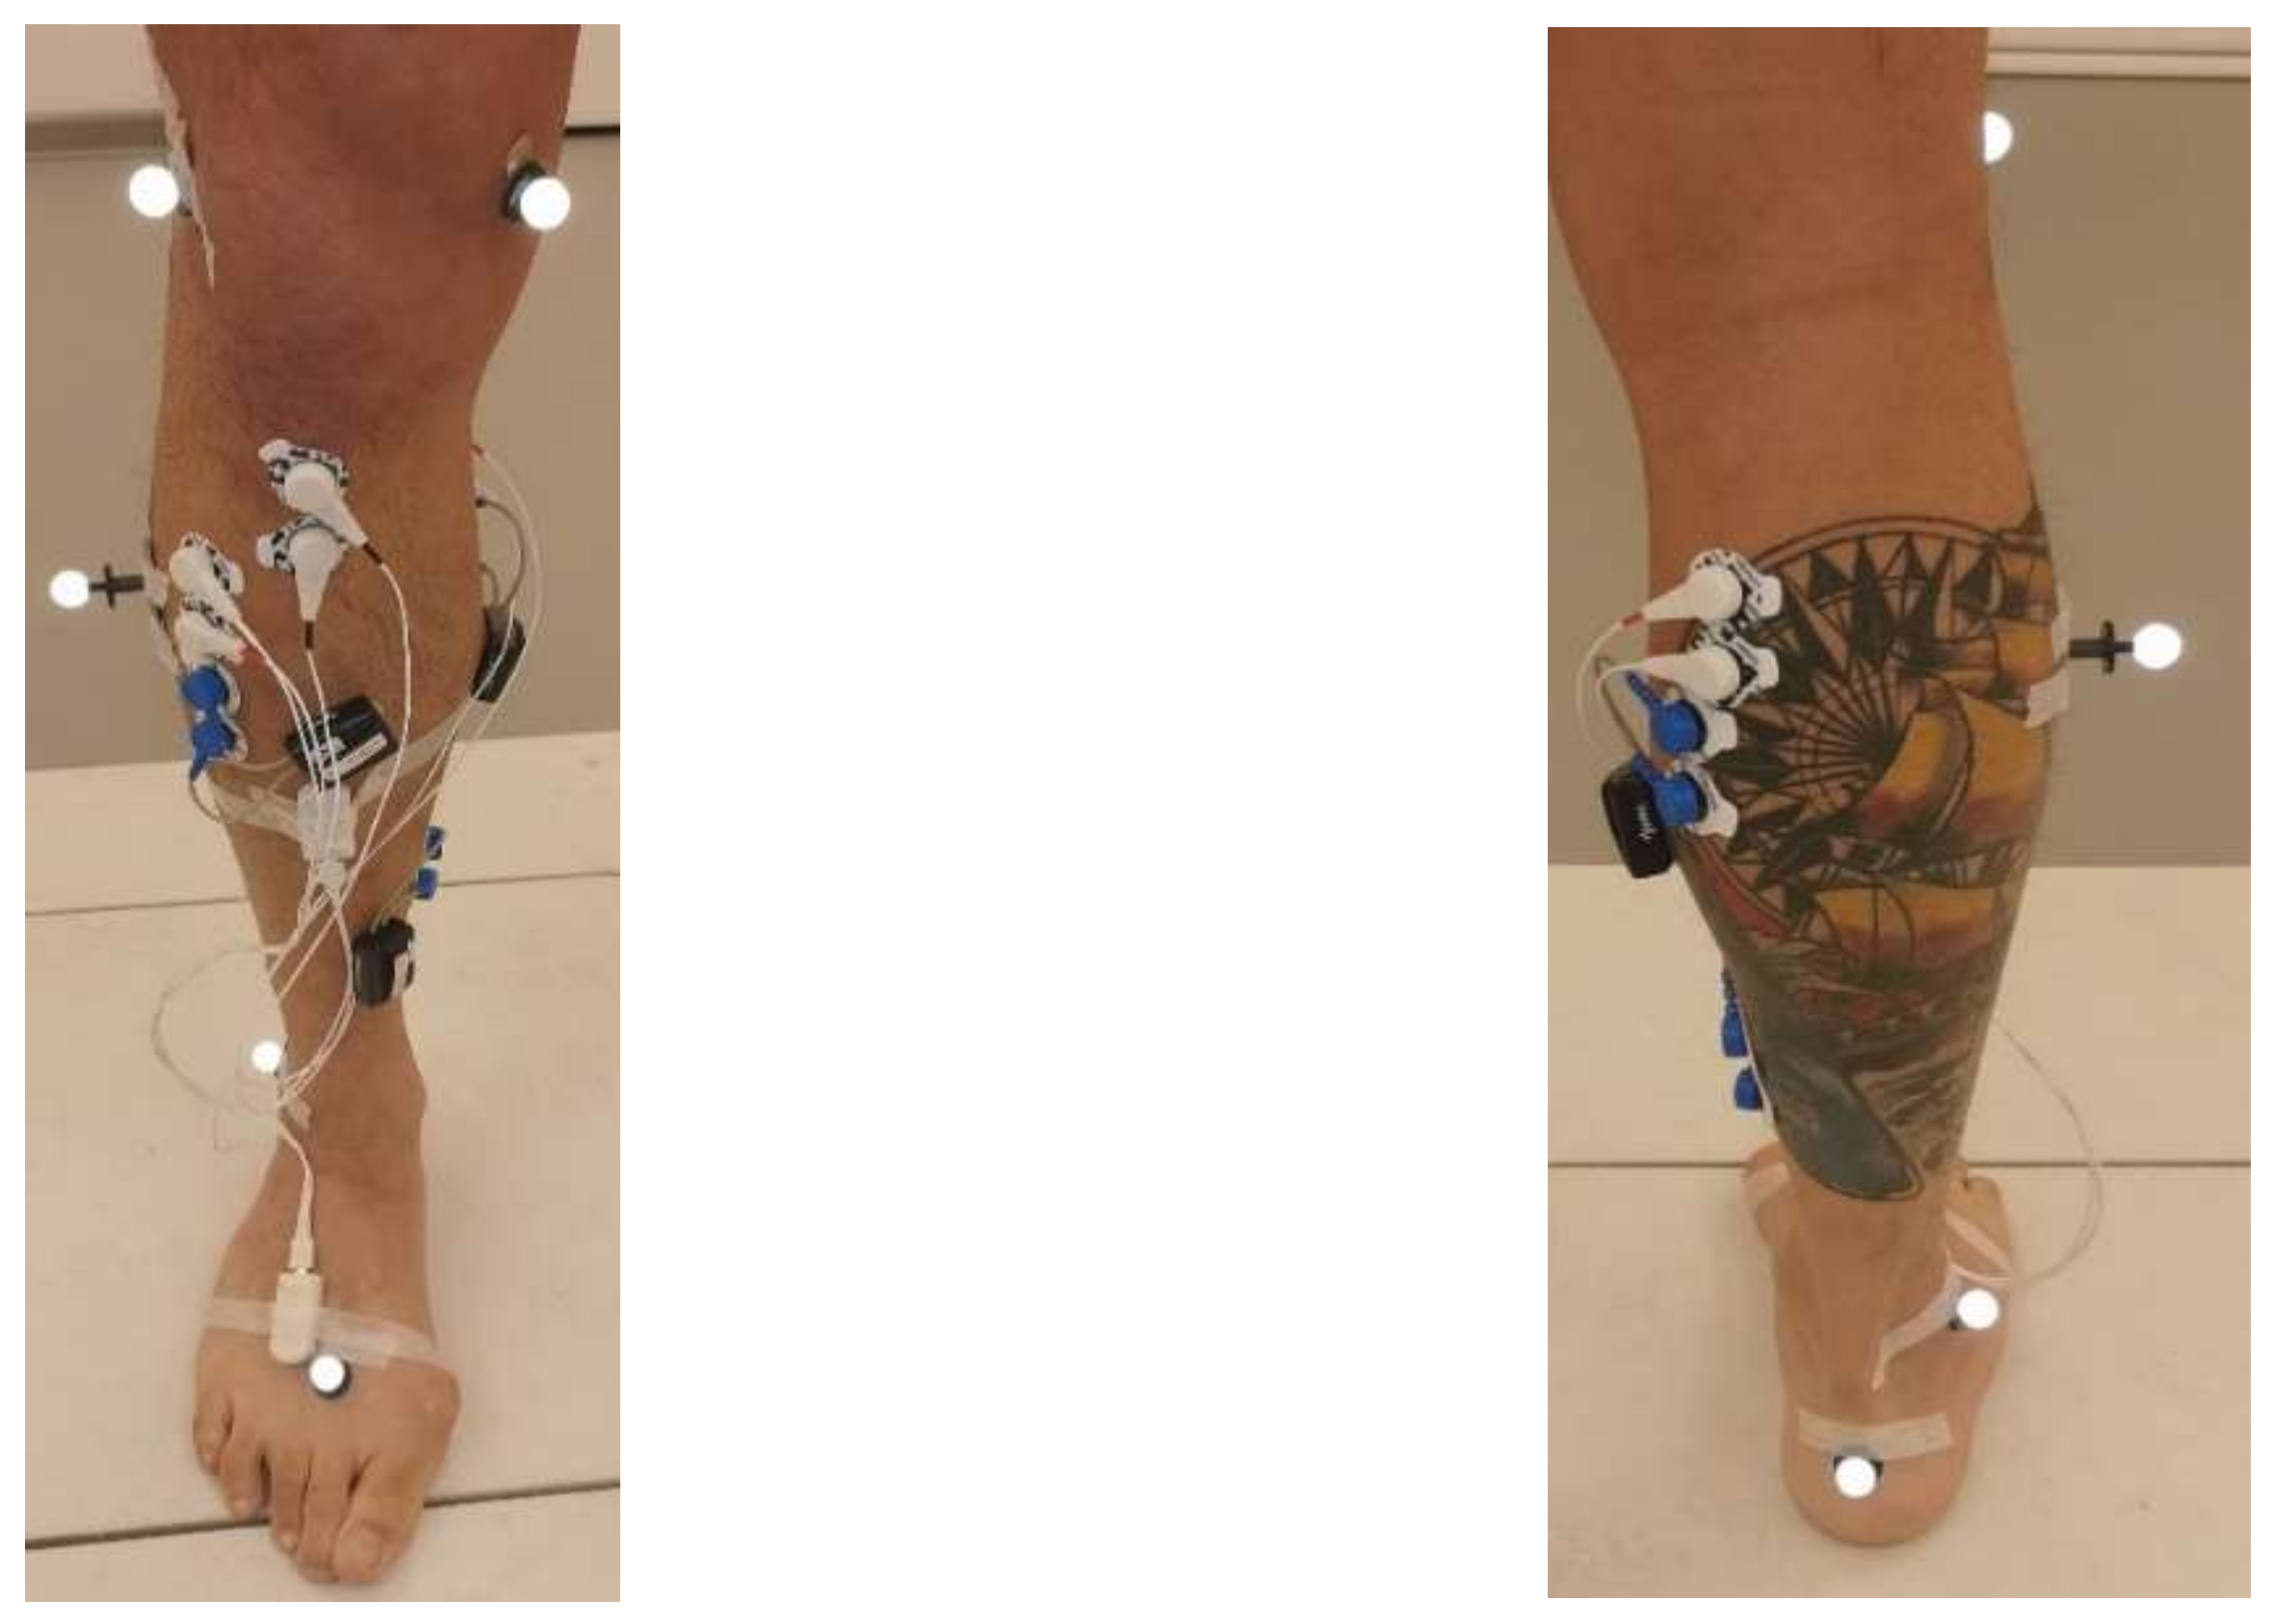 Image of the calf brace containing IMU, MMG, Vicon, and EMG